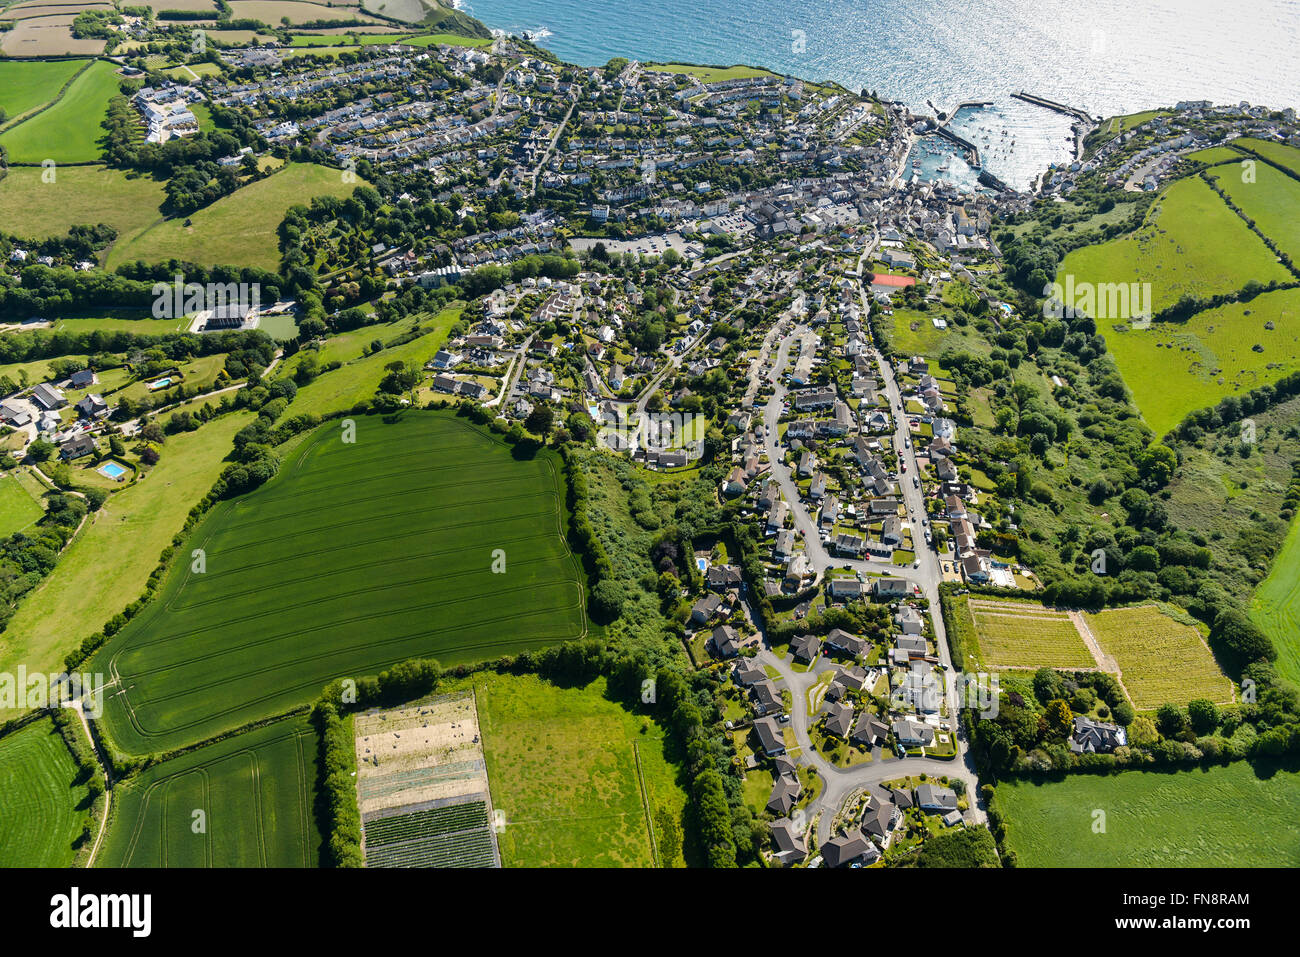 An aerial view of the village of Mevagissey and surrounding Cornish coastline Stock Photo